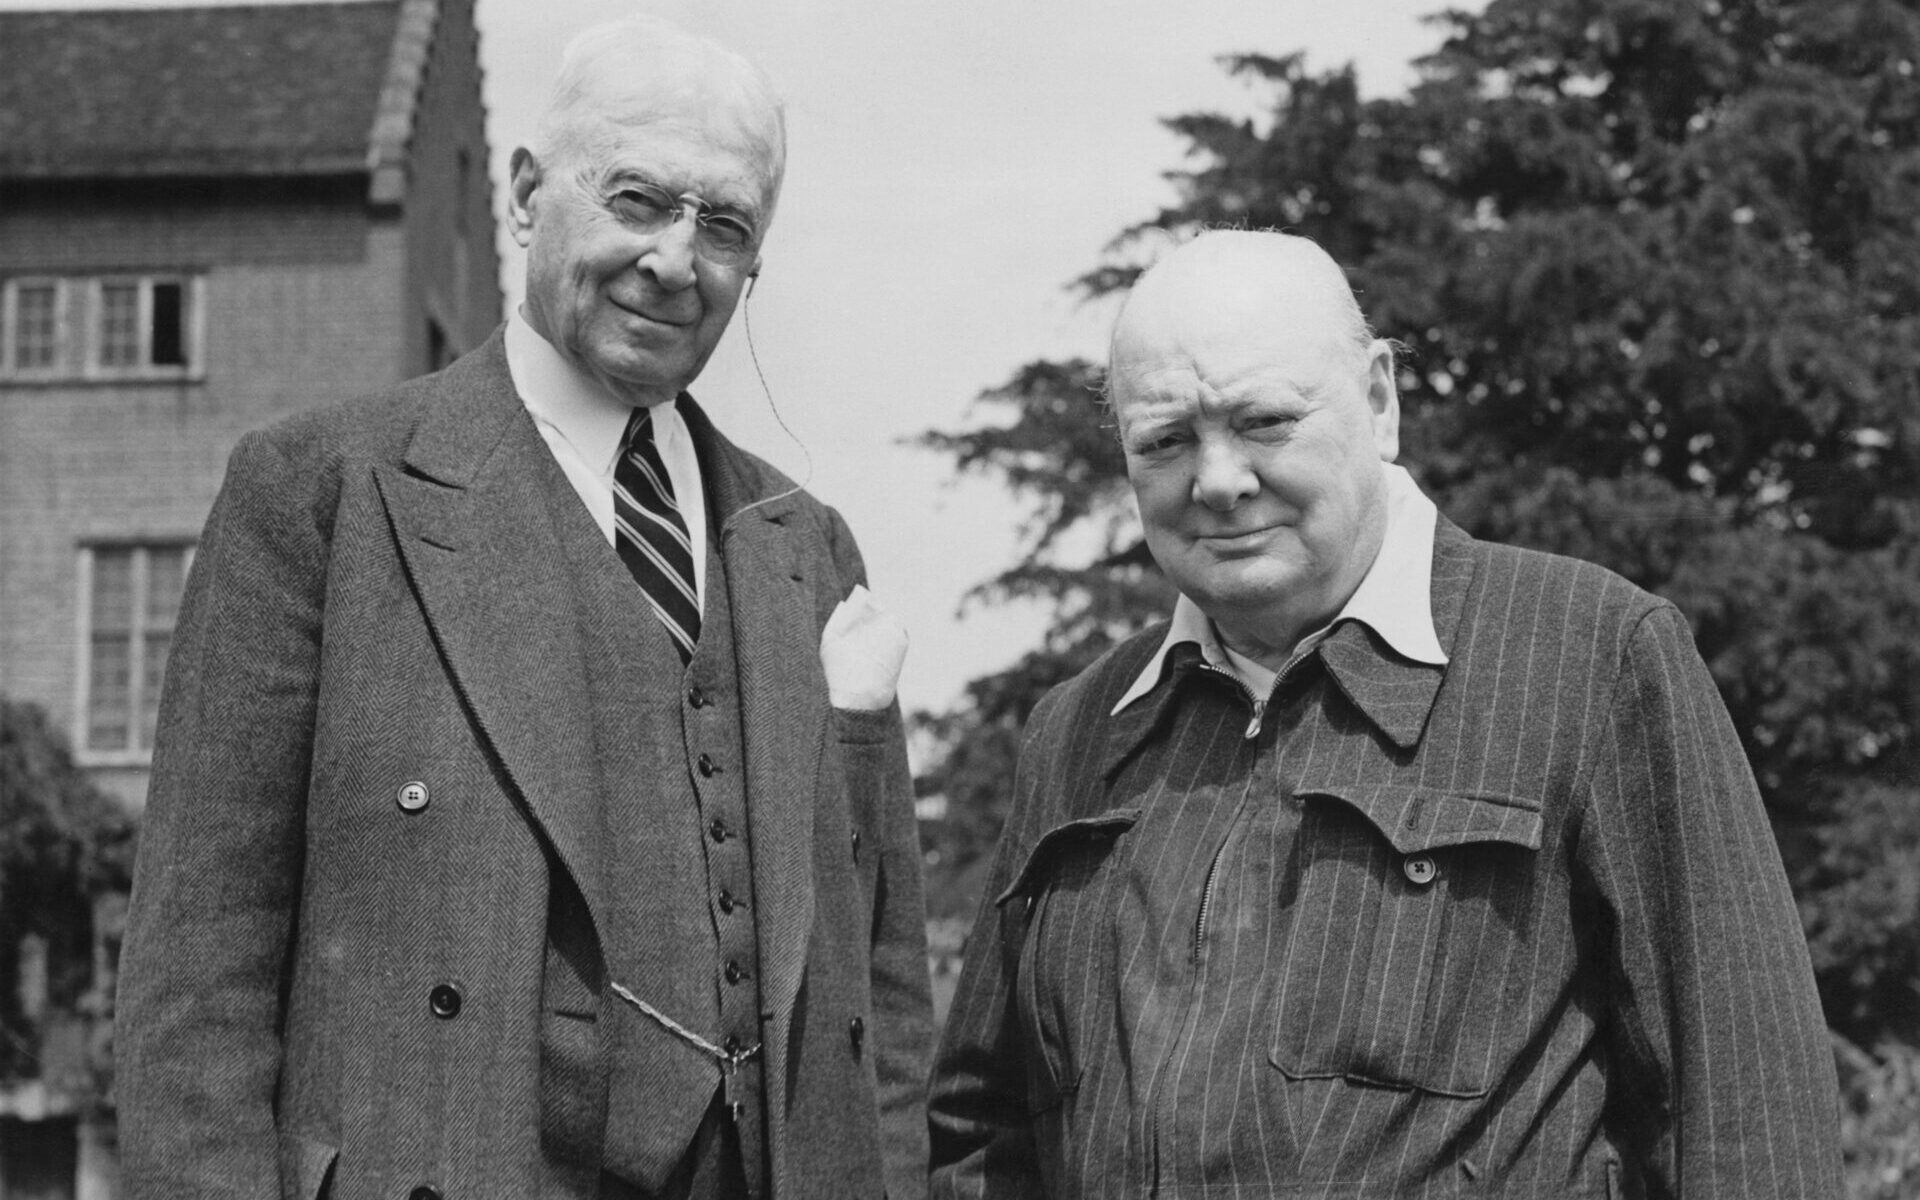 British statesman Winston Churchill (1874 - 1965) welcomes his friend Bernard Baruch (1870 - 1965) to his home at Chartwell in Kent, July 1949. Baruch is an American financier and political consultant. Churchill is wearing his famous 'siren suit', a pinstriped grey wool suit which he wore through the air raids. (Photo by Central Press/Hulton Archive/Getty Images)